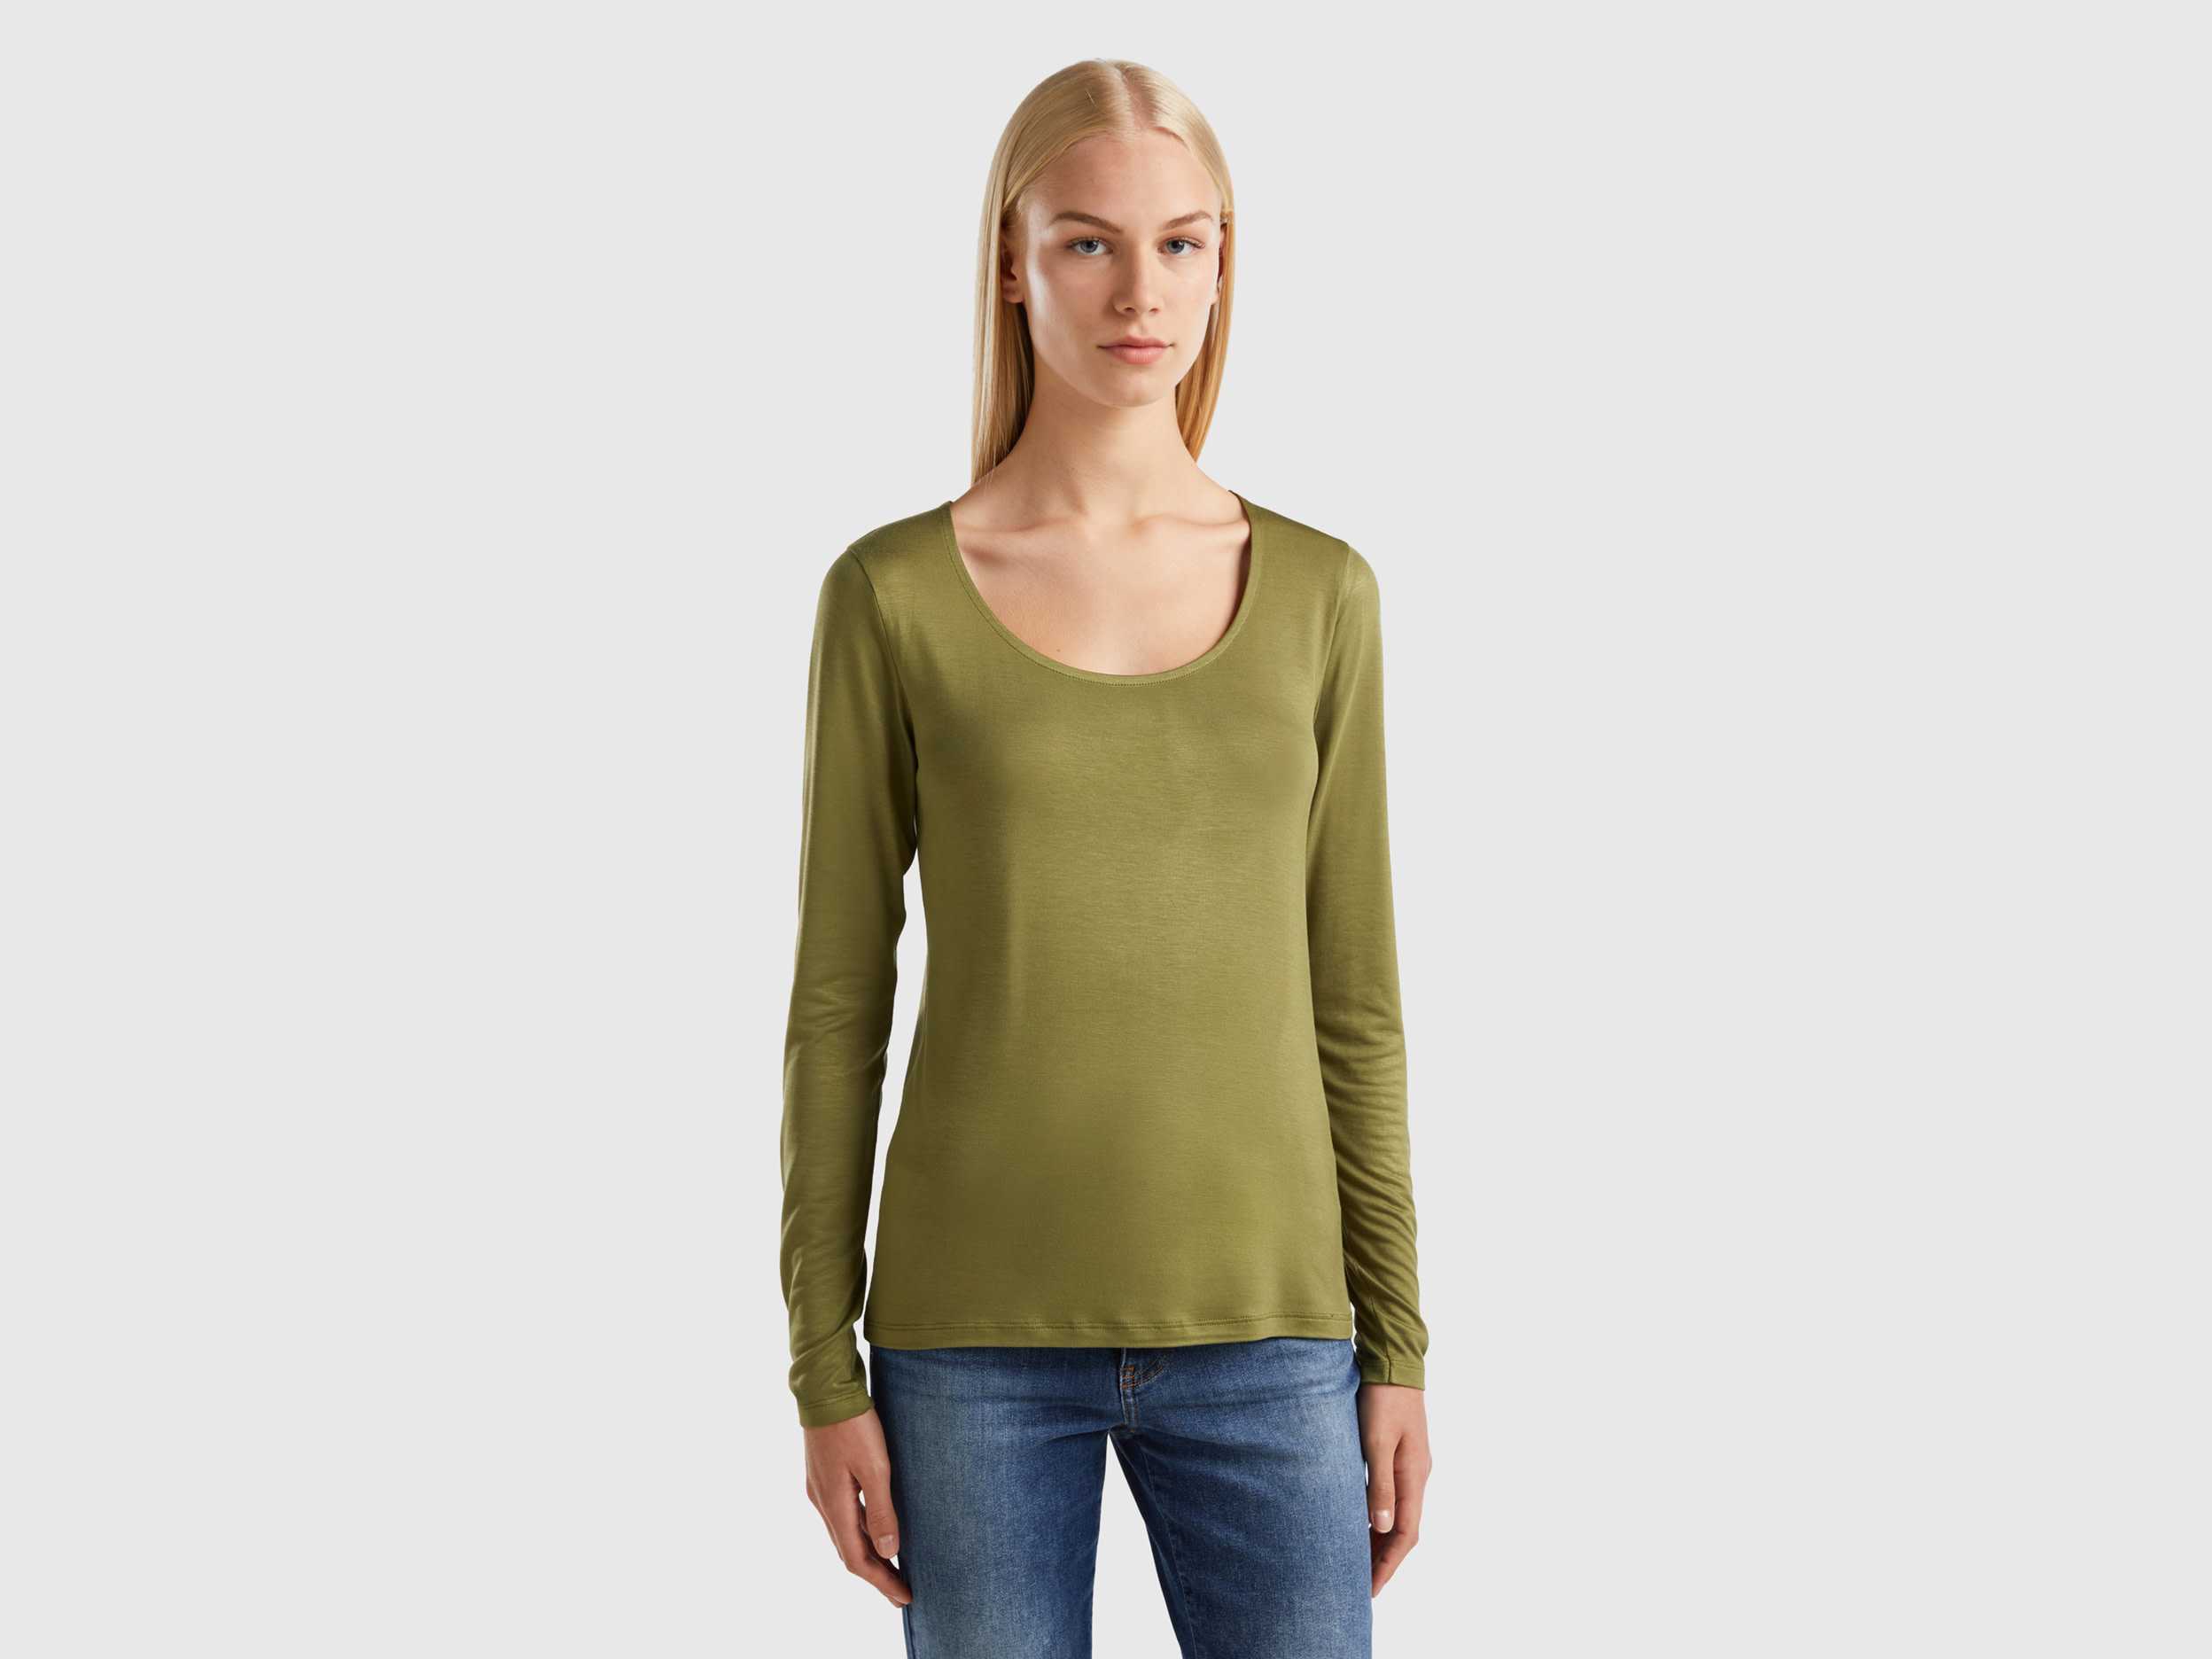 Benetton, T-shirt In Sustainable Stretch Viscose, size XS, Military Green, Women